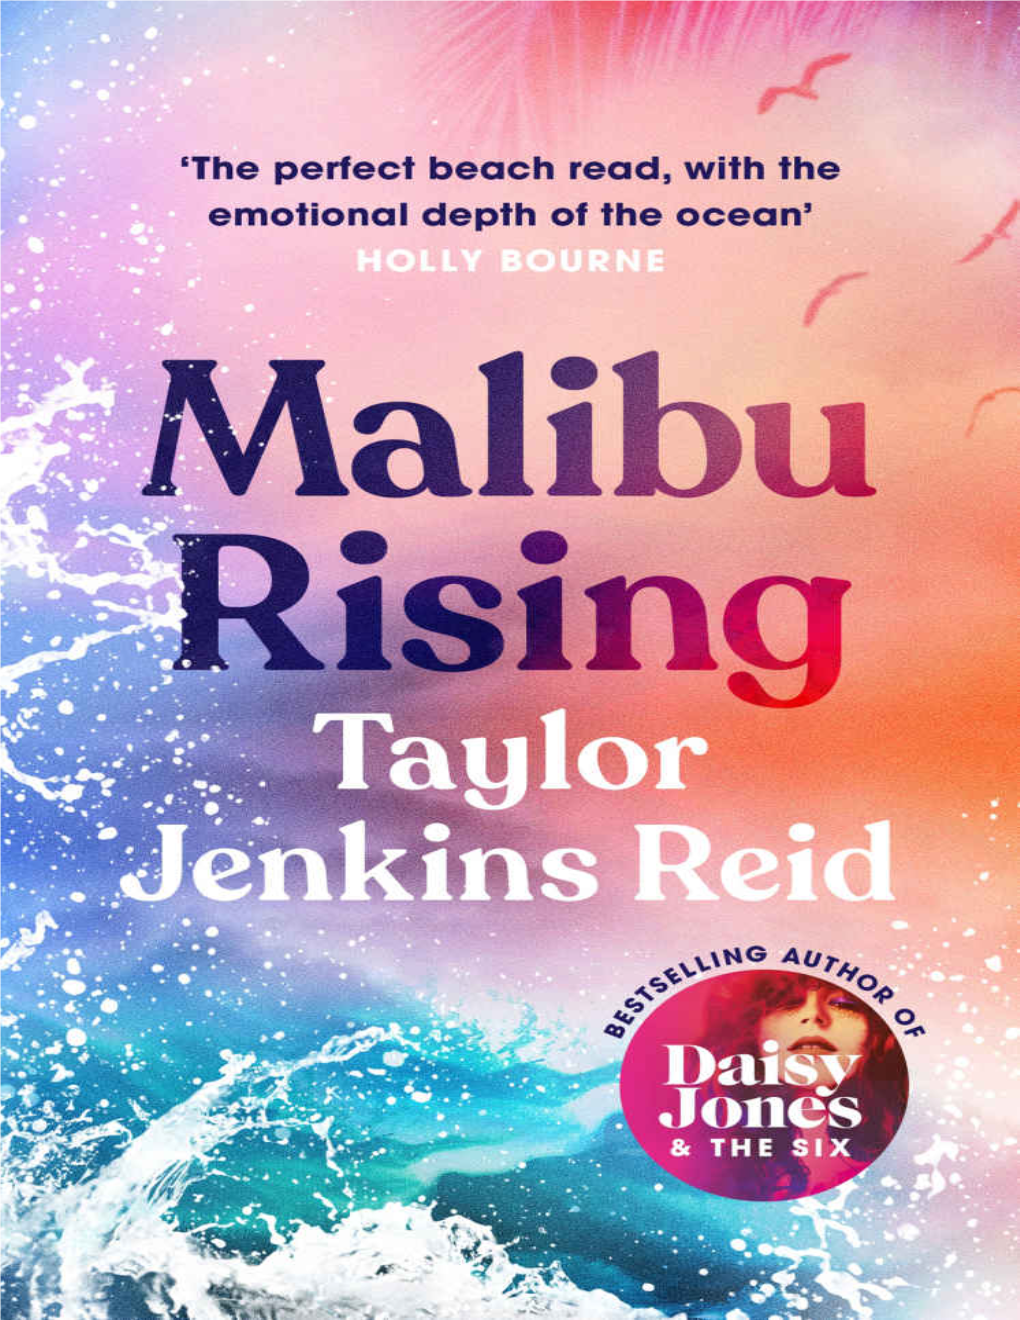 Malibu Rising Daisy Jones & the Six the Seven Husbands of Evelyn Hugo One True Loves Maybe in Another Life After I Do Forever, Interrupted Malibu Catches ﬁre